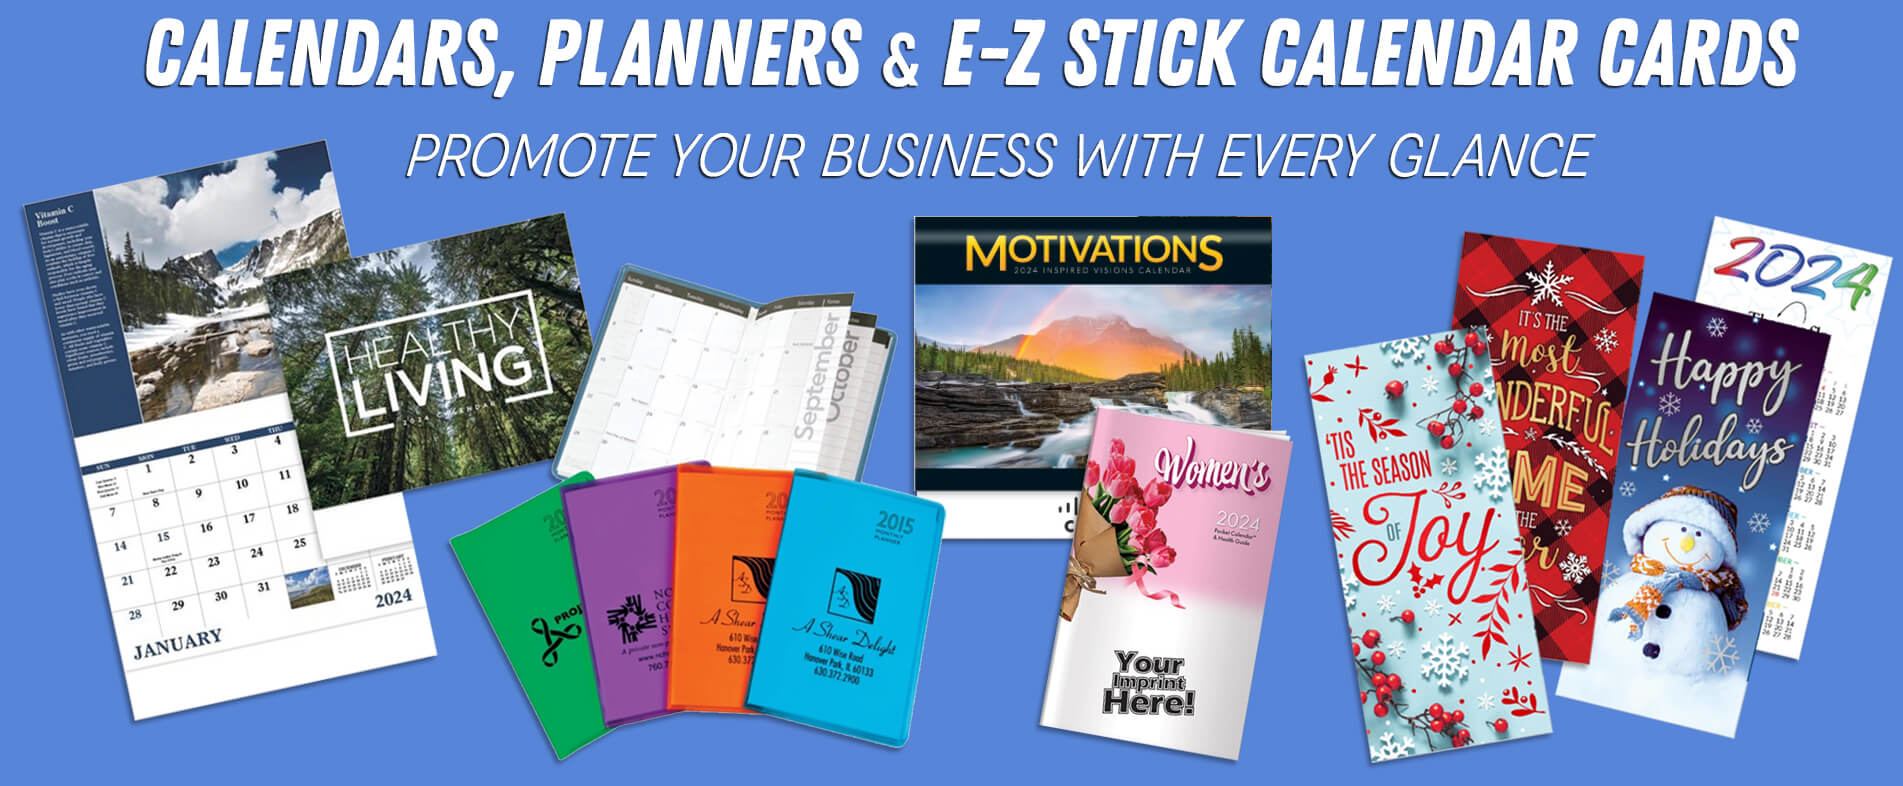 Promotional Wall Calendars & Pocket Planners | Care Promotions